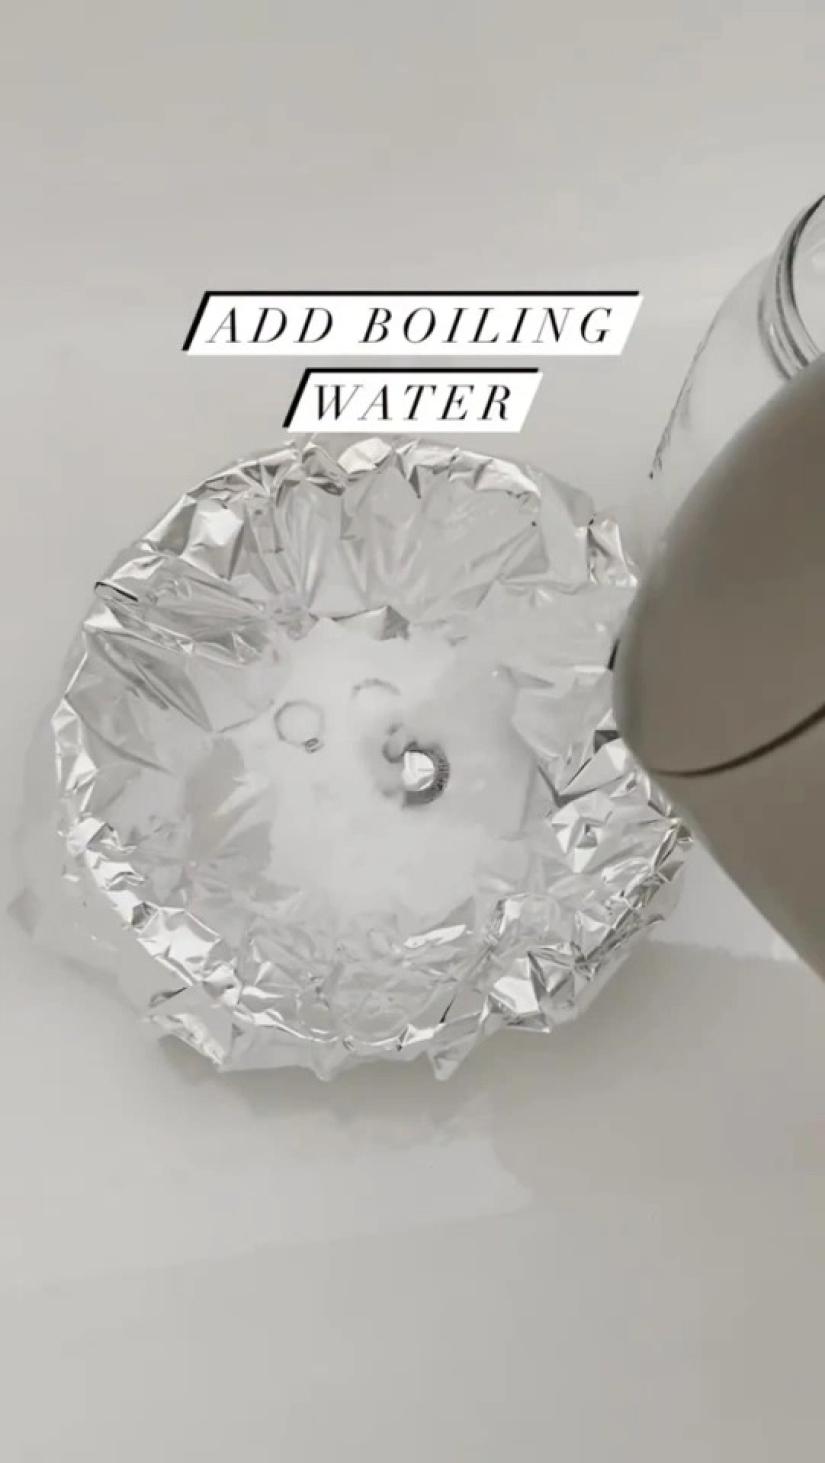 Soda, foil, boiling water: here is a great way to quickly and effectively clean jewelry